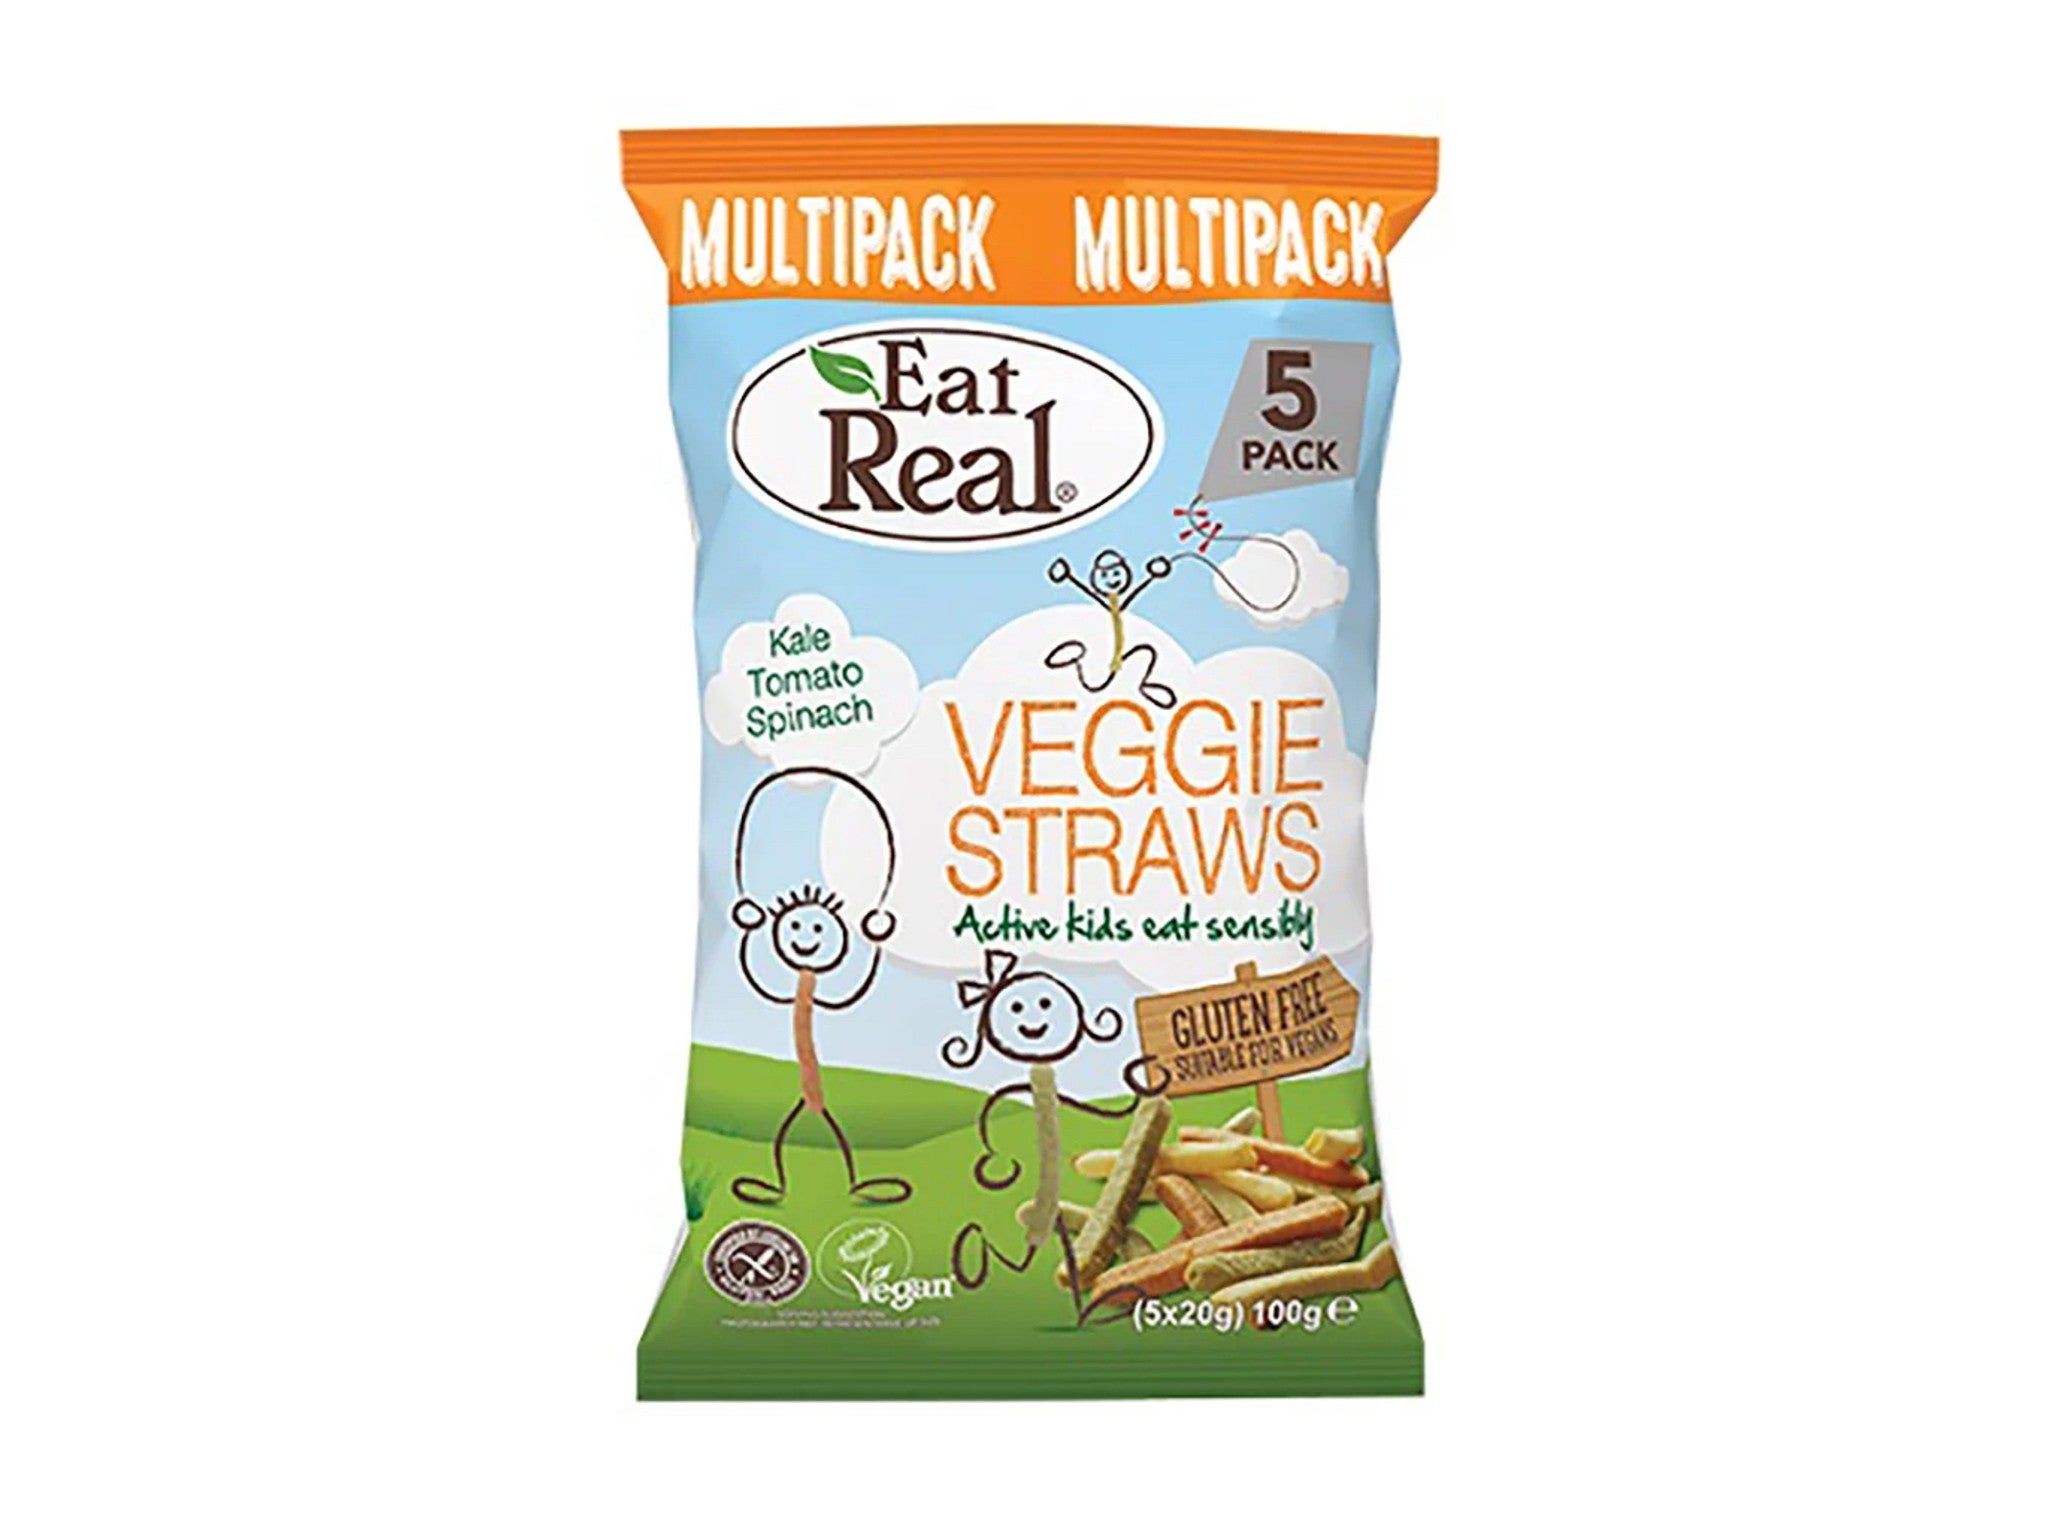 Eat Real veggie straws kale, tomato and spinach multipack indybest.jpg